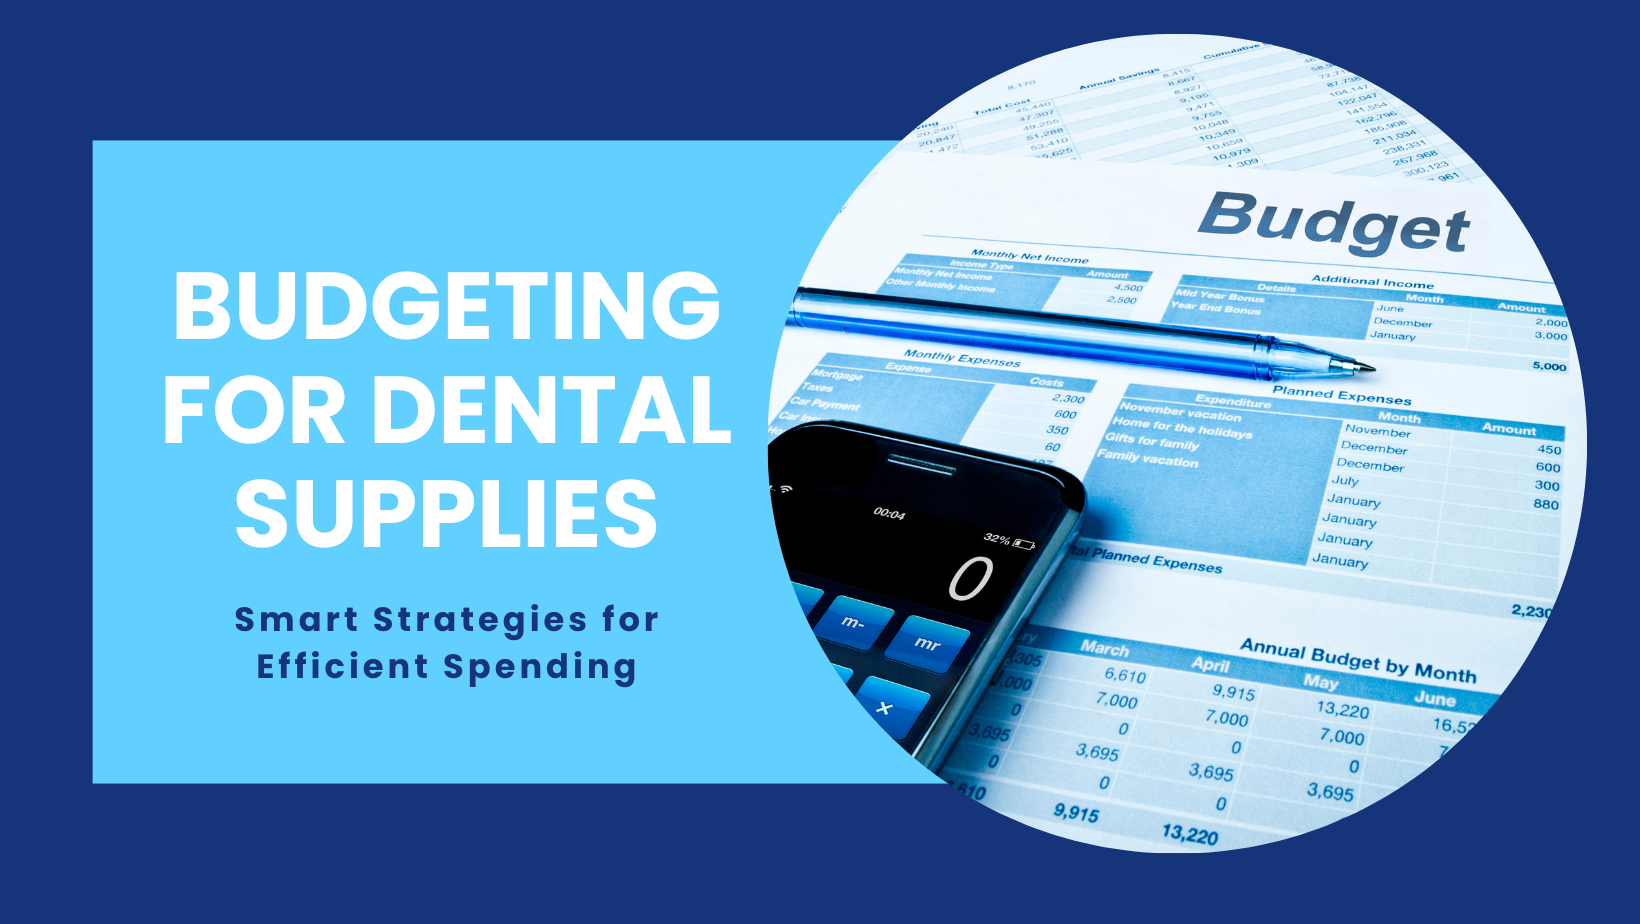 Budgeting for dental supplies